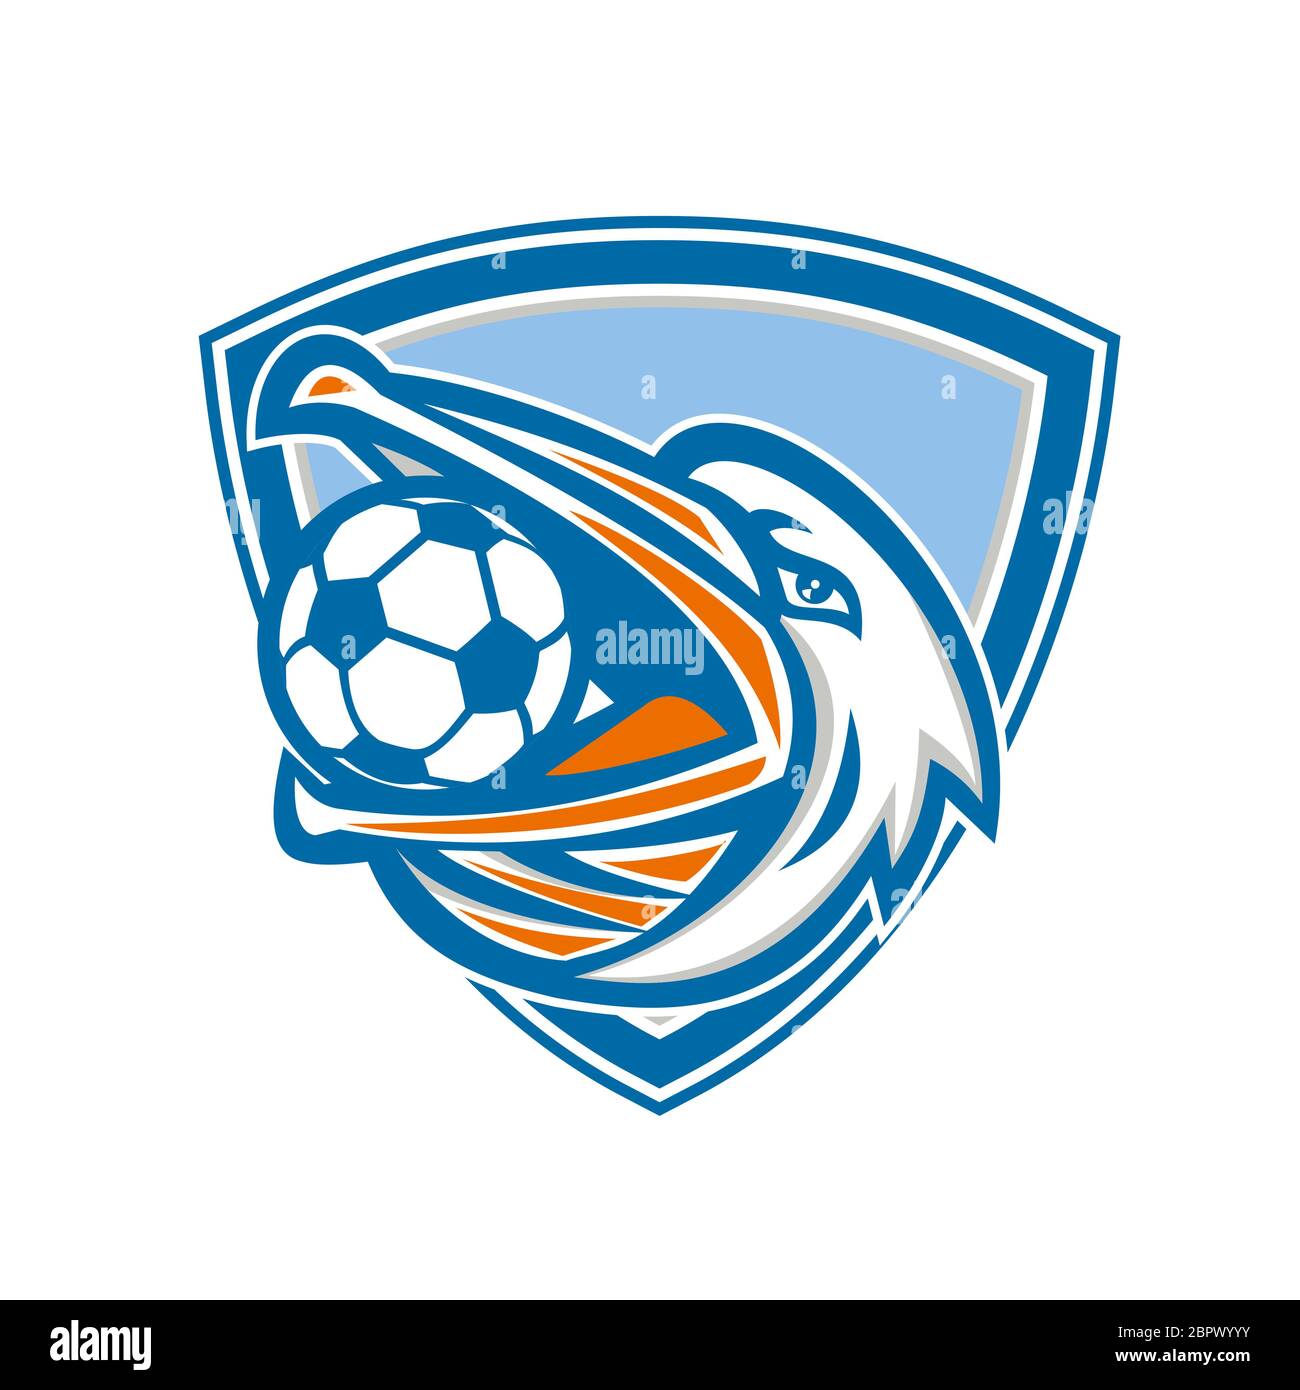 Illustration of a head of a pelican bird with soccer or football ball inside mouth looking up to the side set inside shield crest done in retro style. Stock Photo